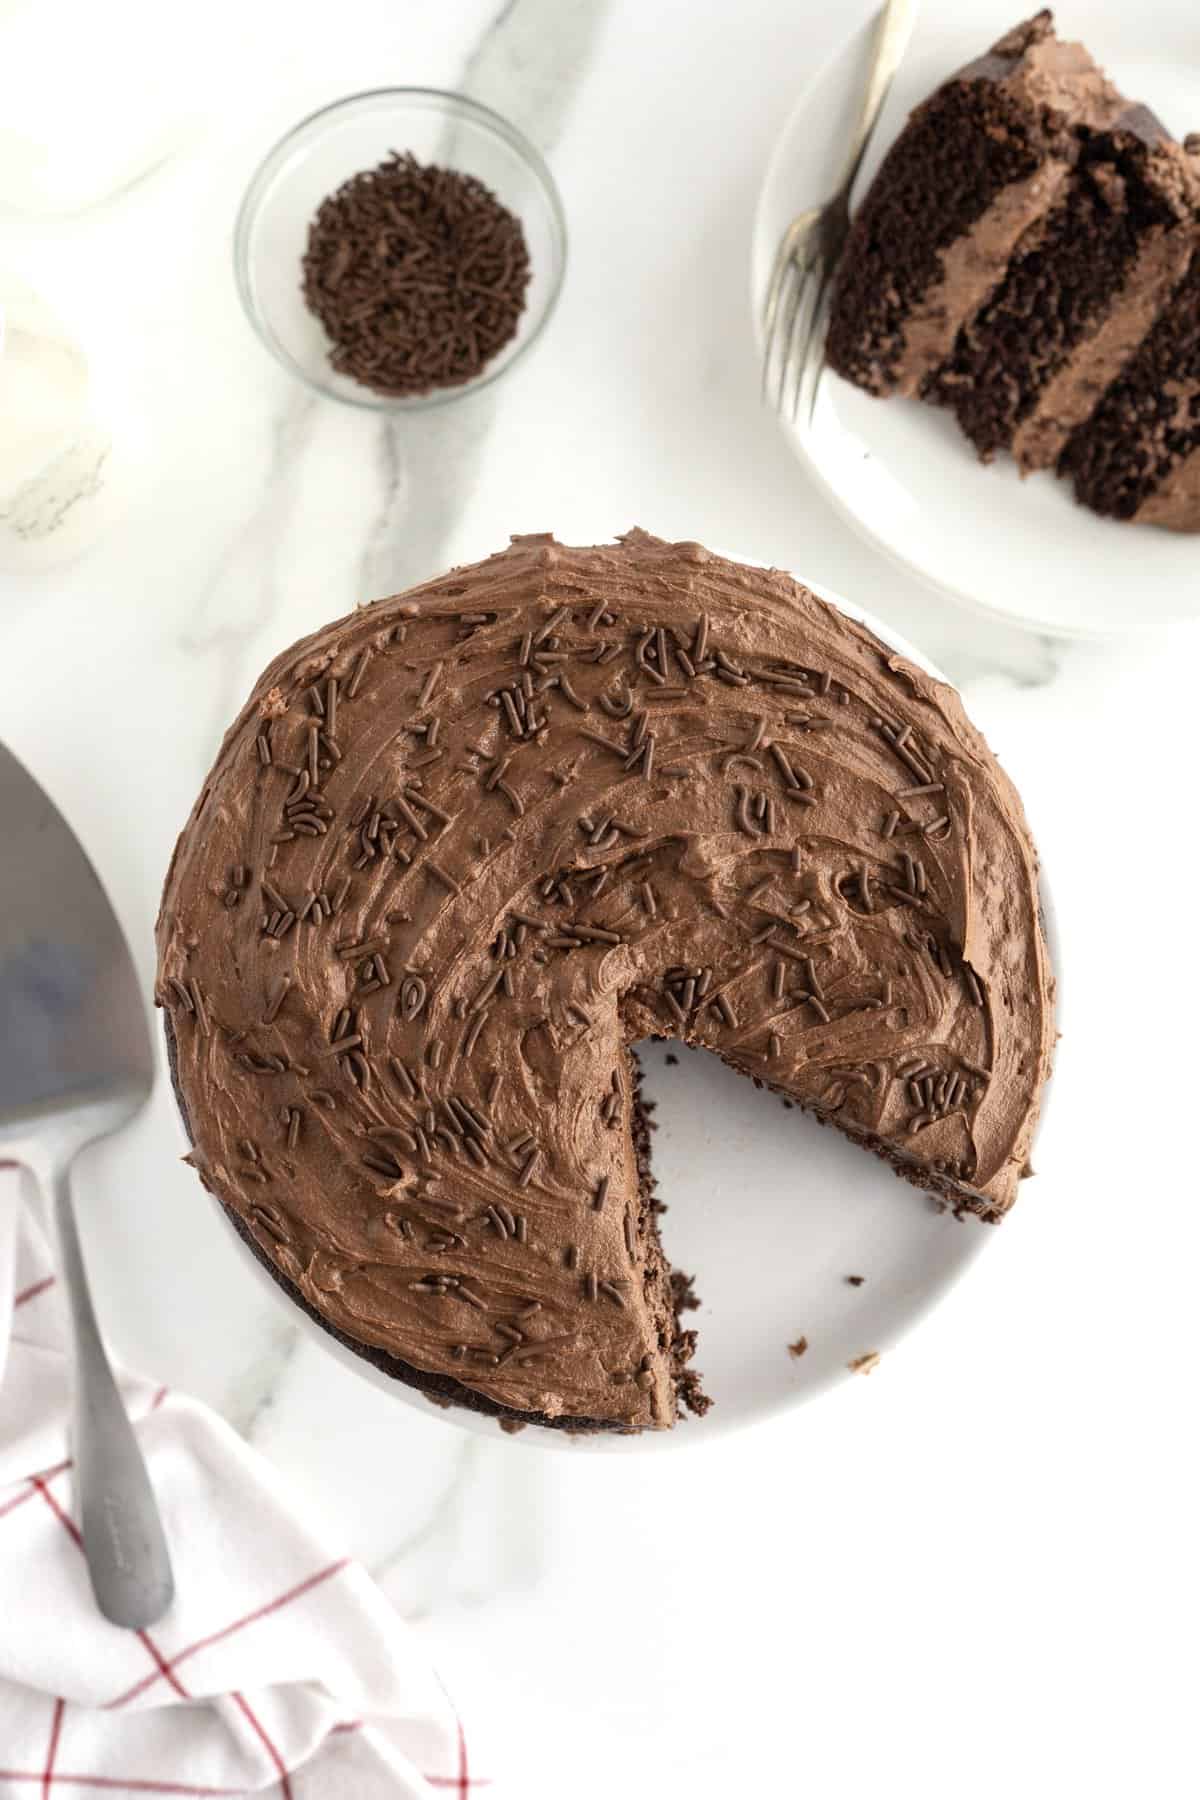 The Greatest Chocolate Cake by The BakerMama